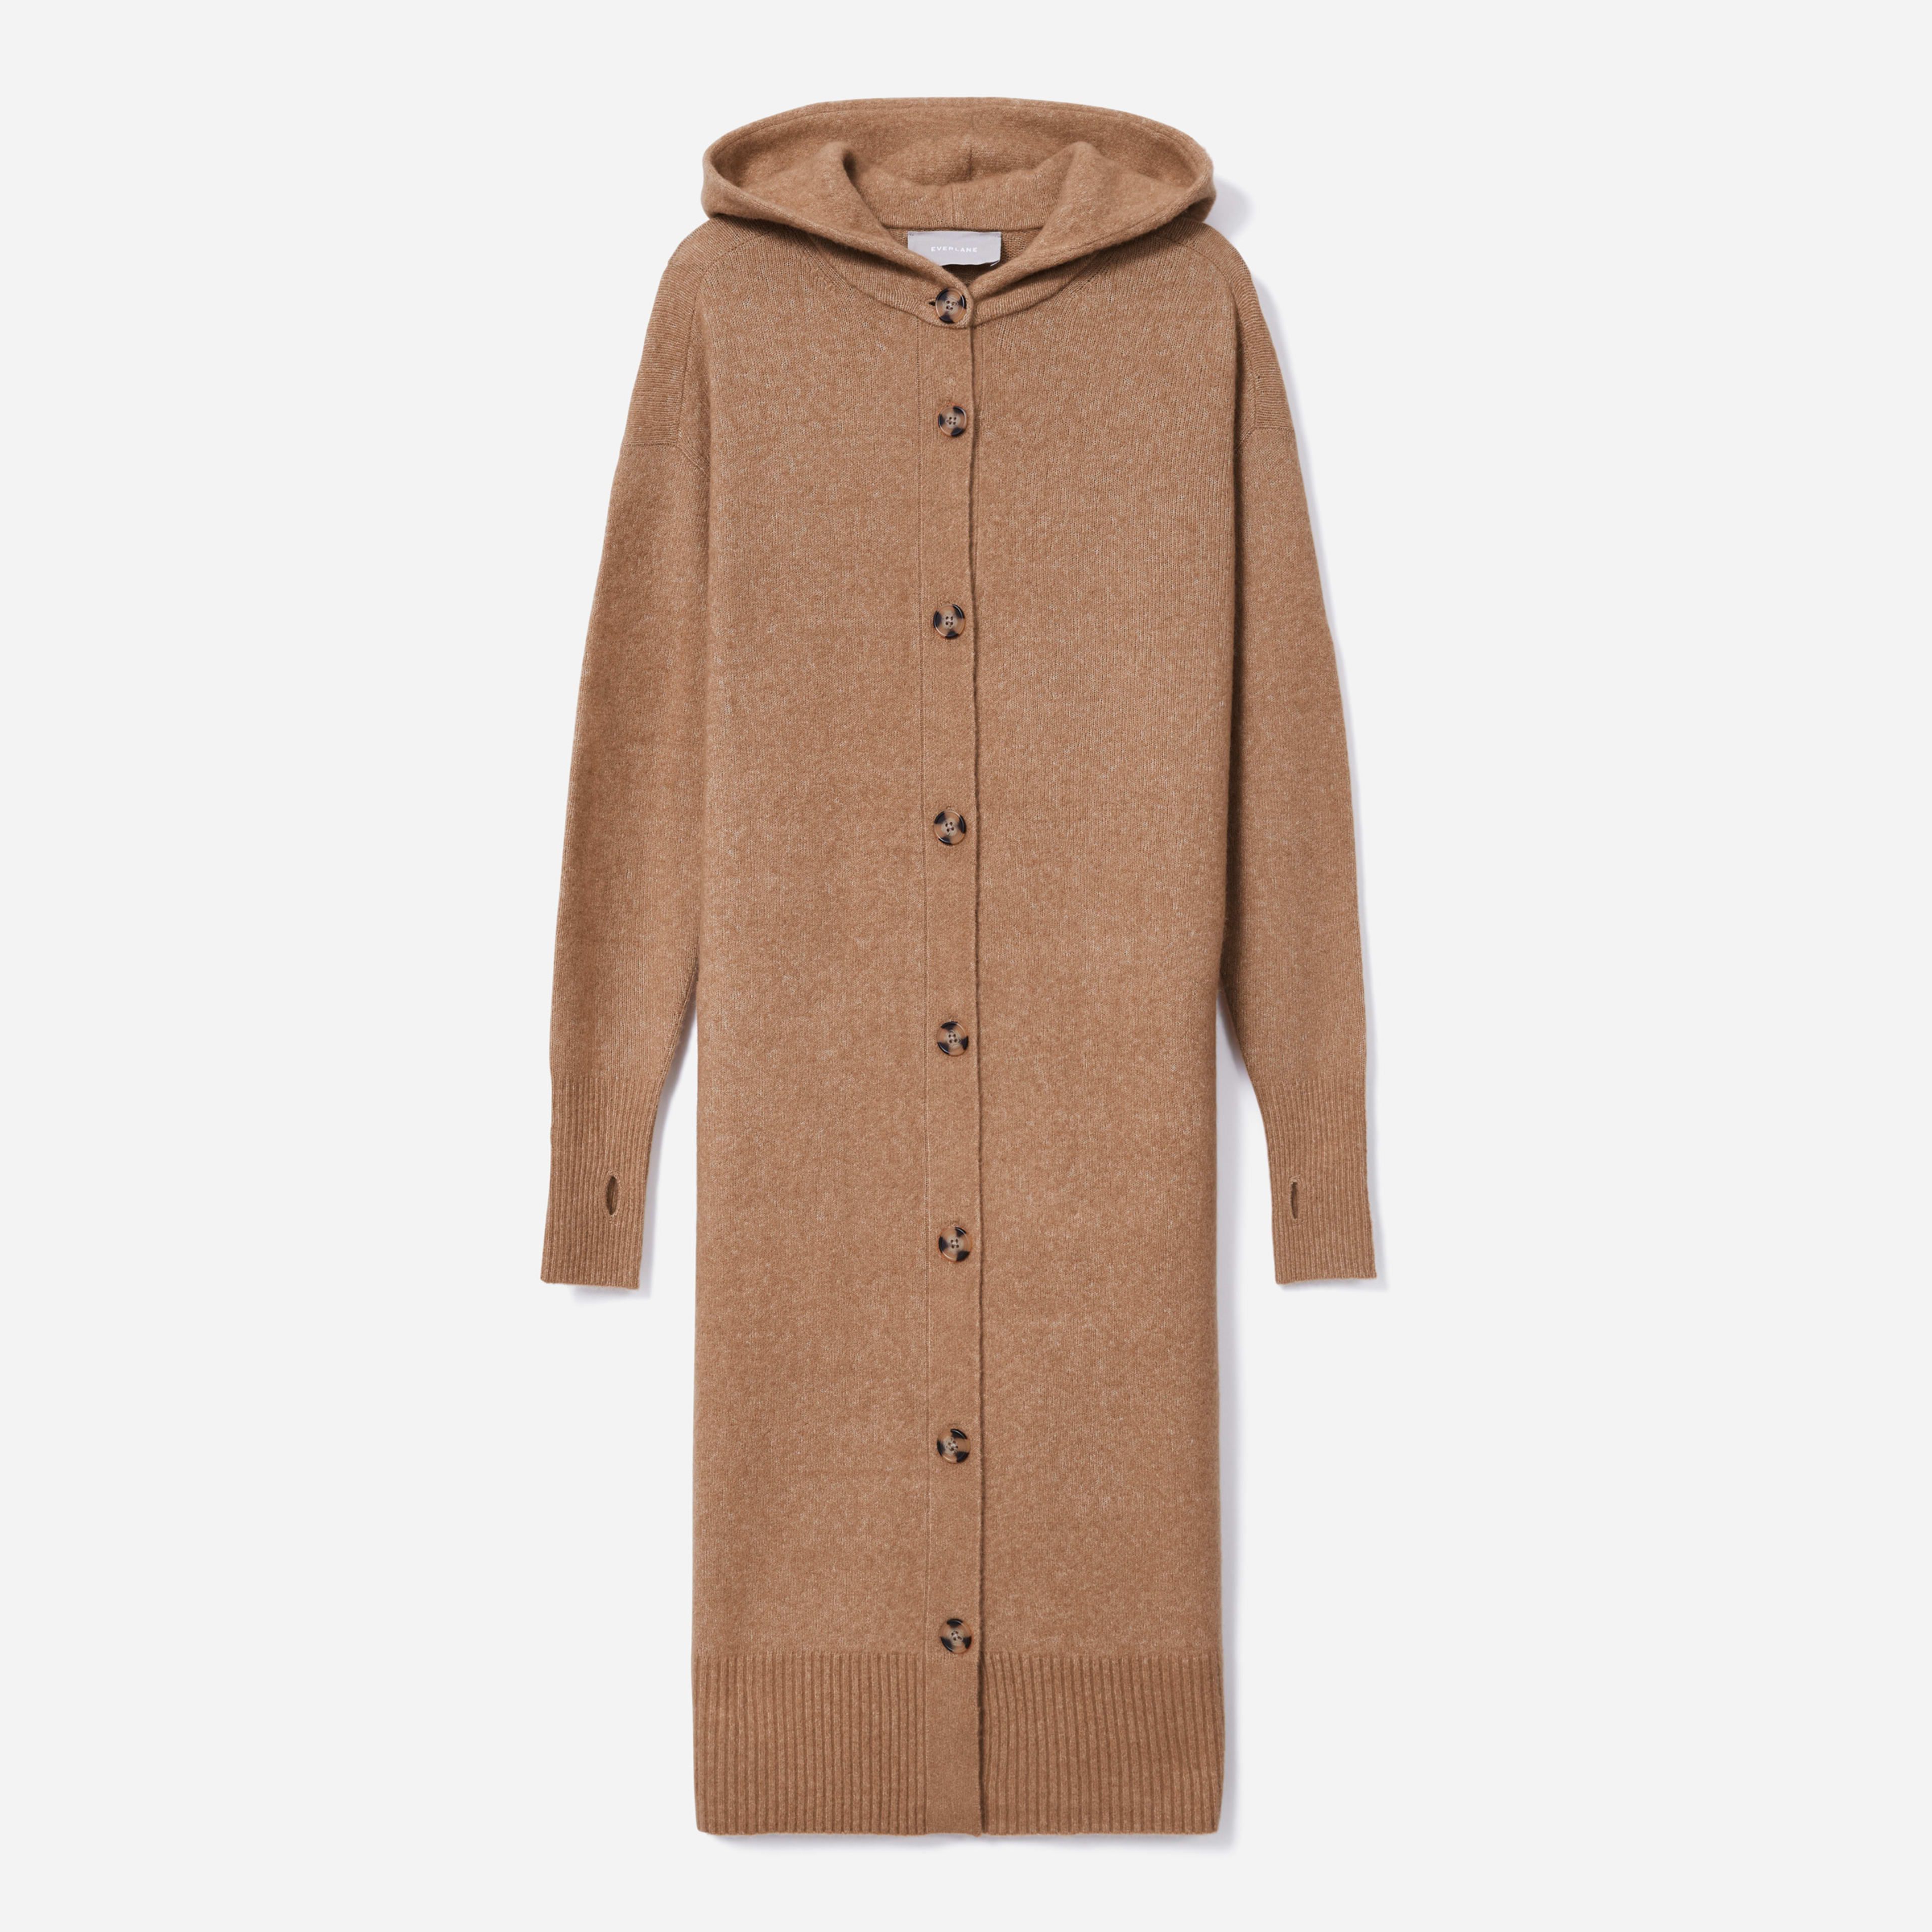 The Cozy-Stretch Duster | Everlane